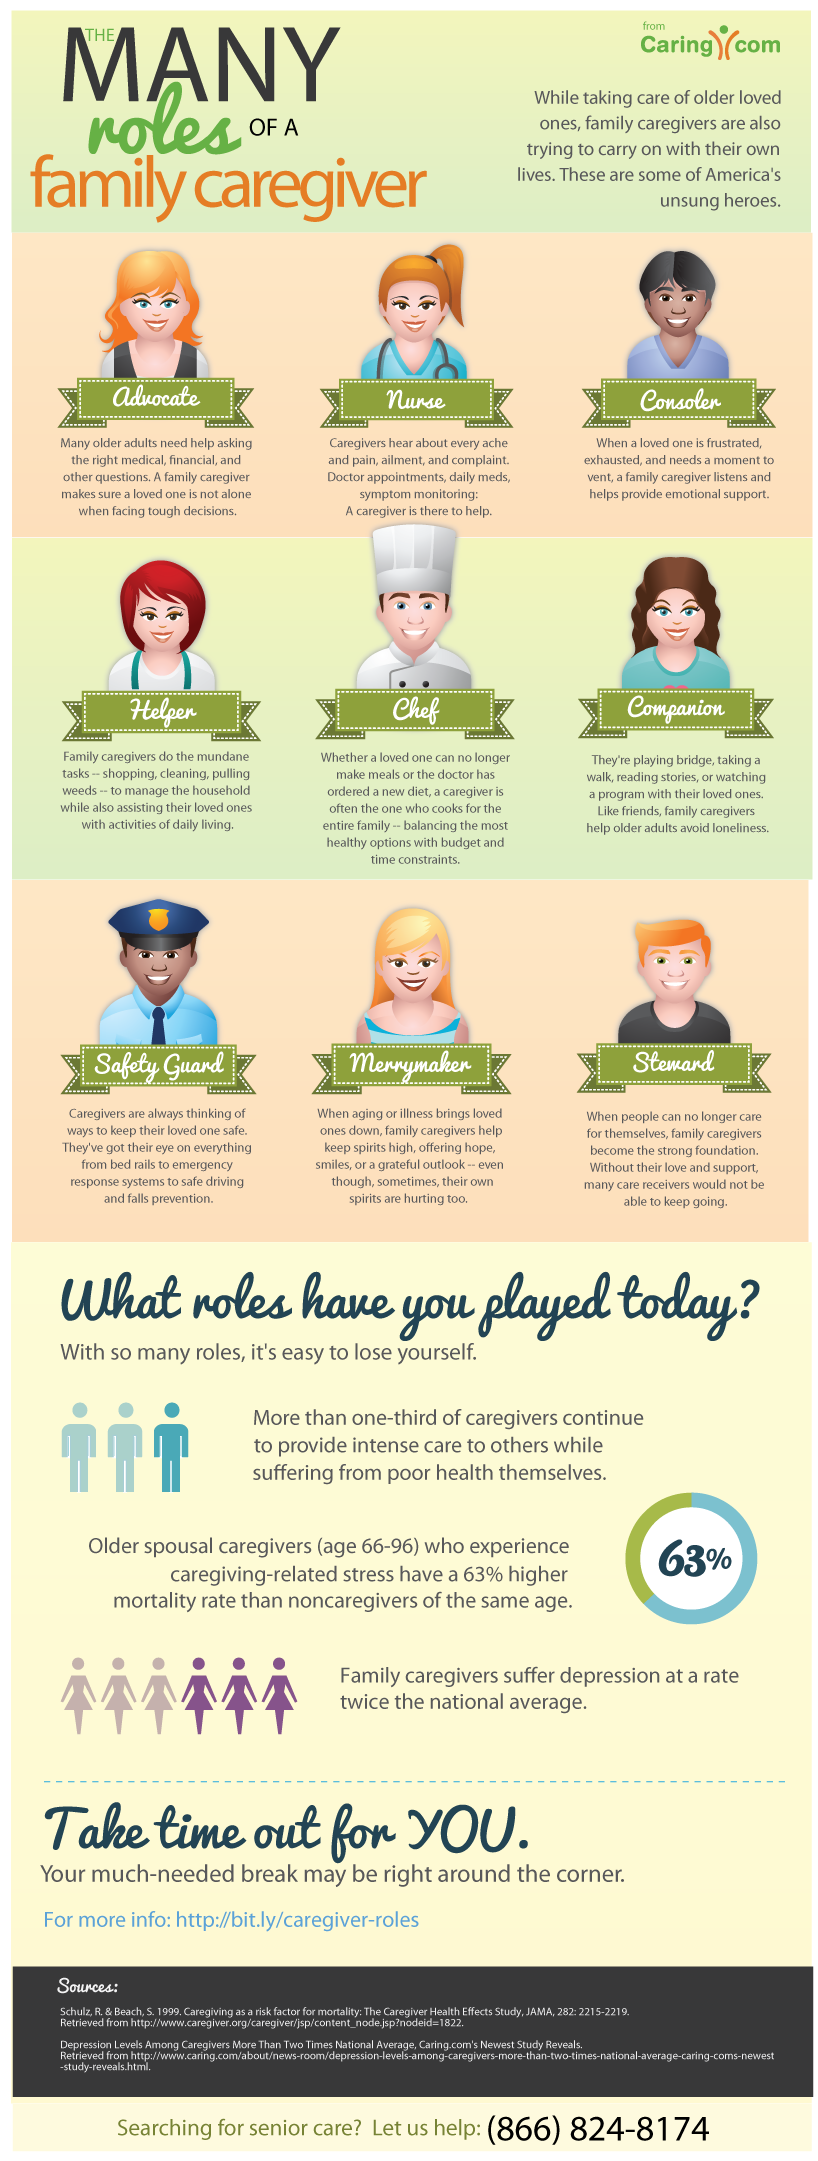 Infographic: The Many Roles of a Family Caregiver -- What roles have you played today?